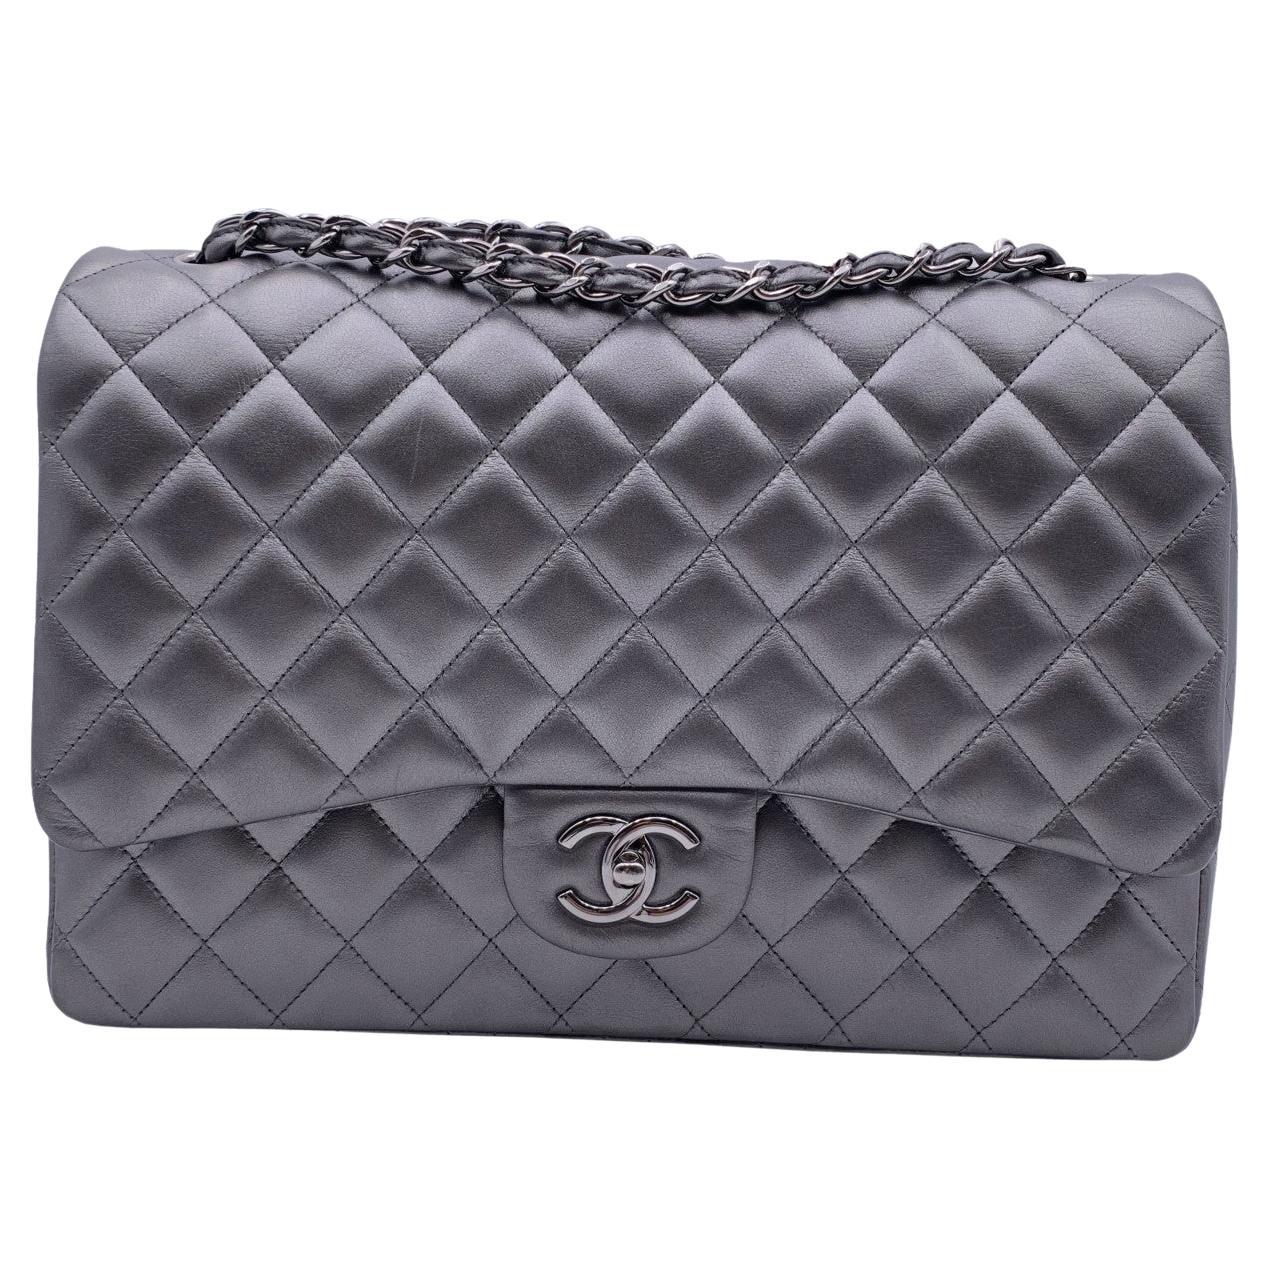 Chanel Grey Metallic Quilted Leather Classic Maxi Double Flap Bag